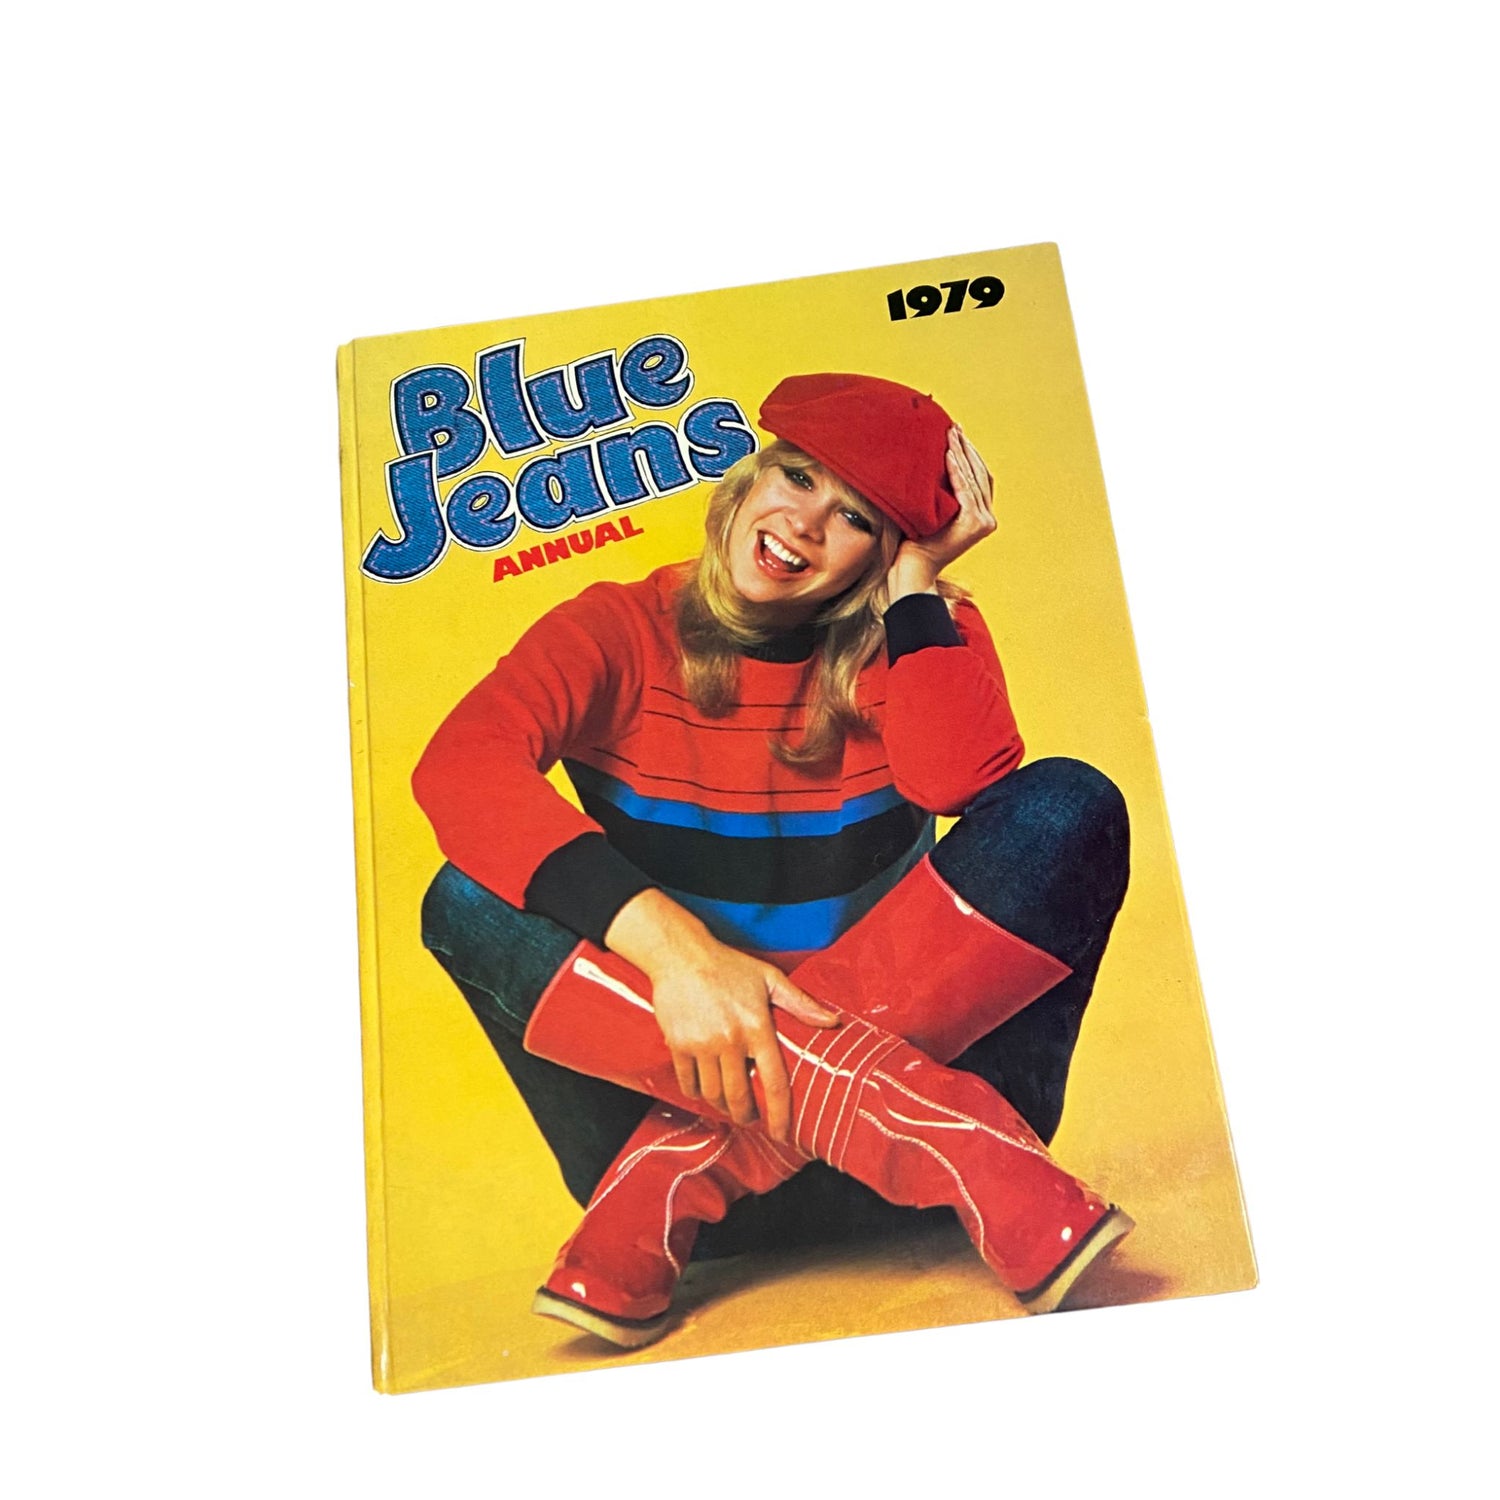 A picture of a 1979 Blue Jeans annual with Jo Wood on the cover